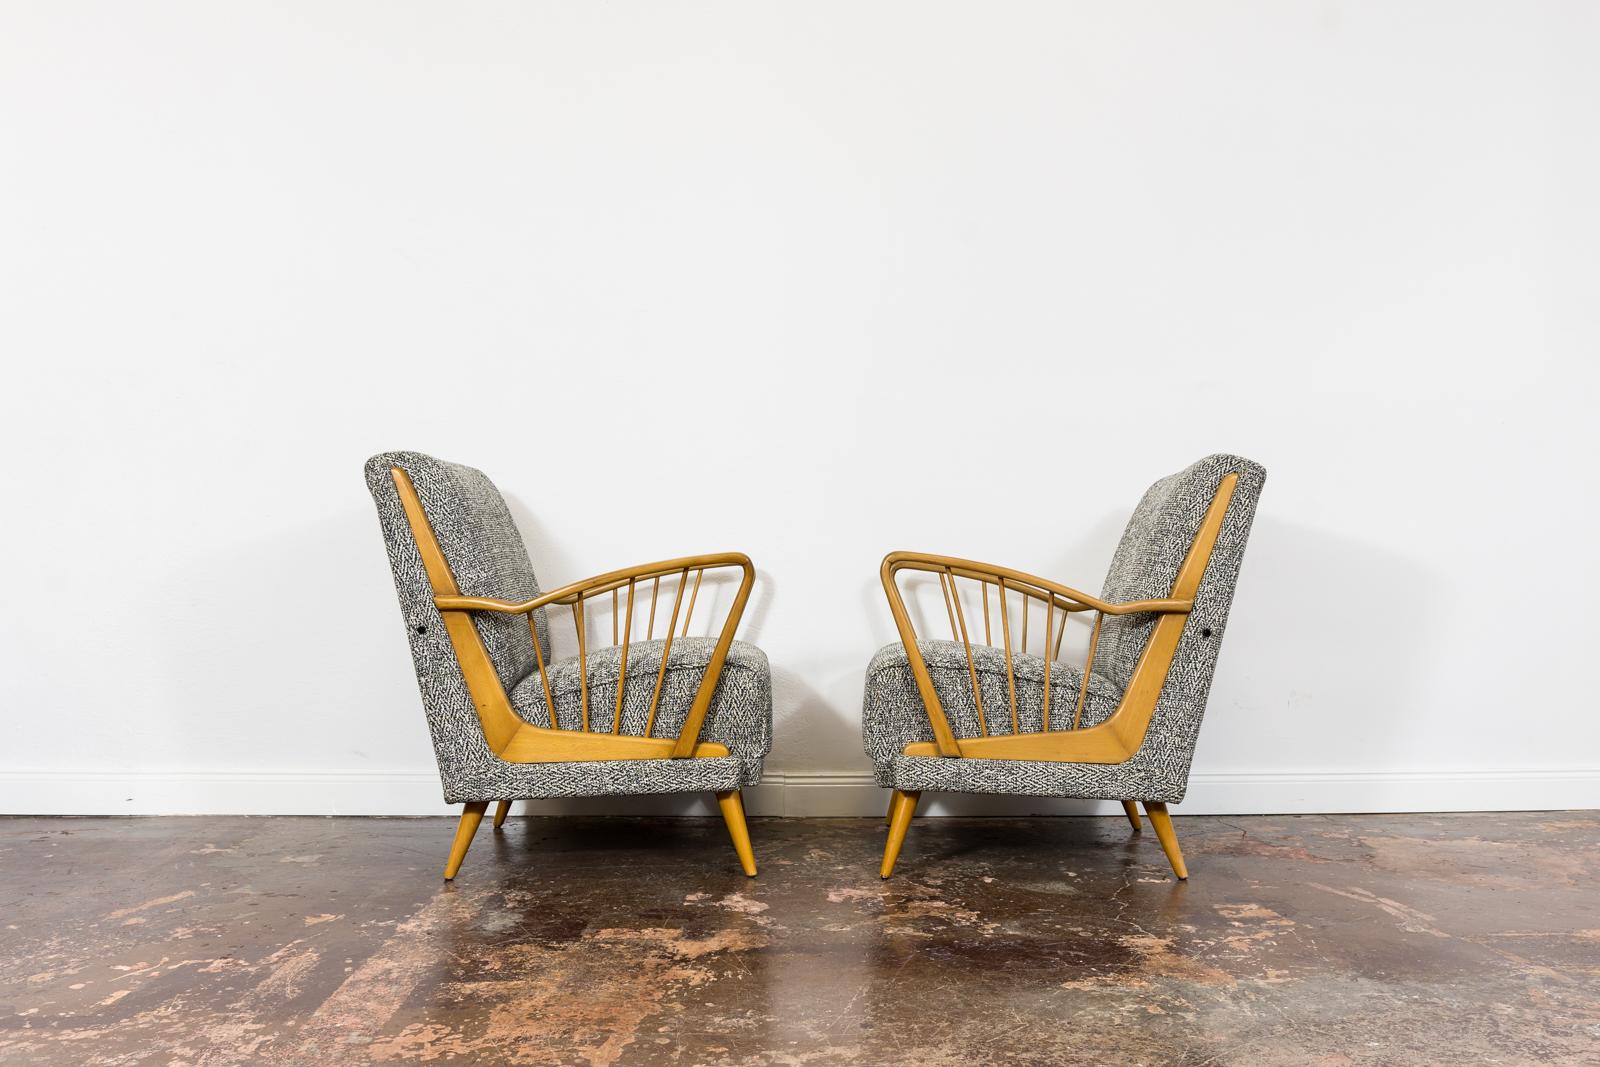 Pair of Mid-Century armchairs, 1950's, Germany.
Solid wood legs and harp-shaped armrest have been completely restored and refinished.
Reupholstered in black-grey-white woven fabric.